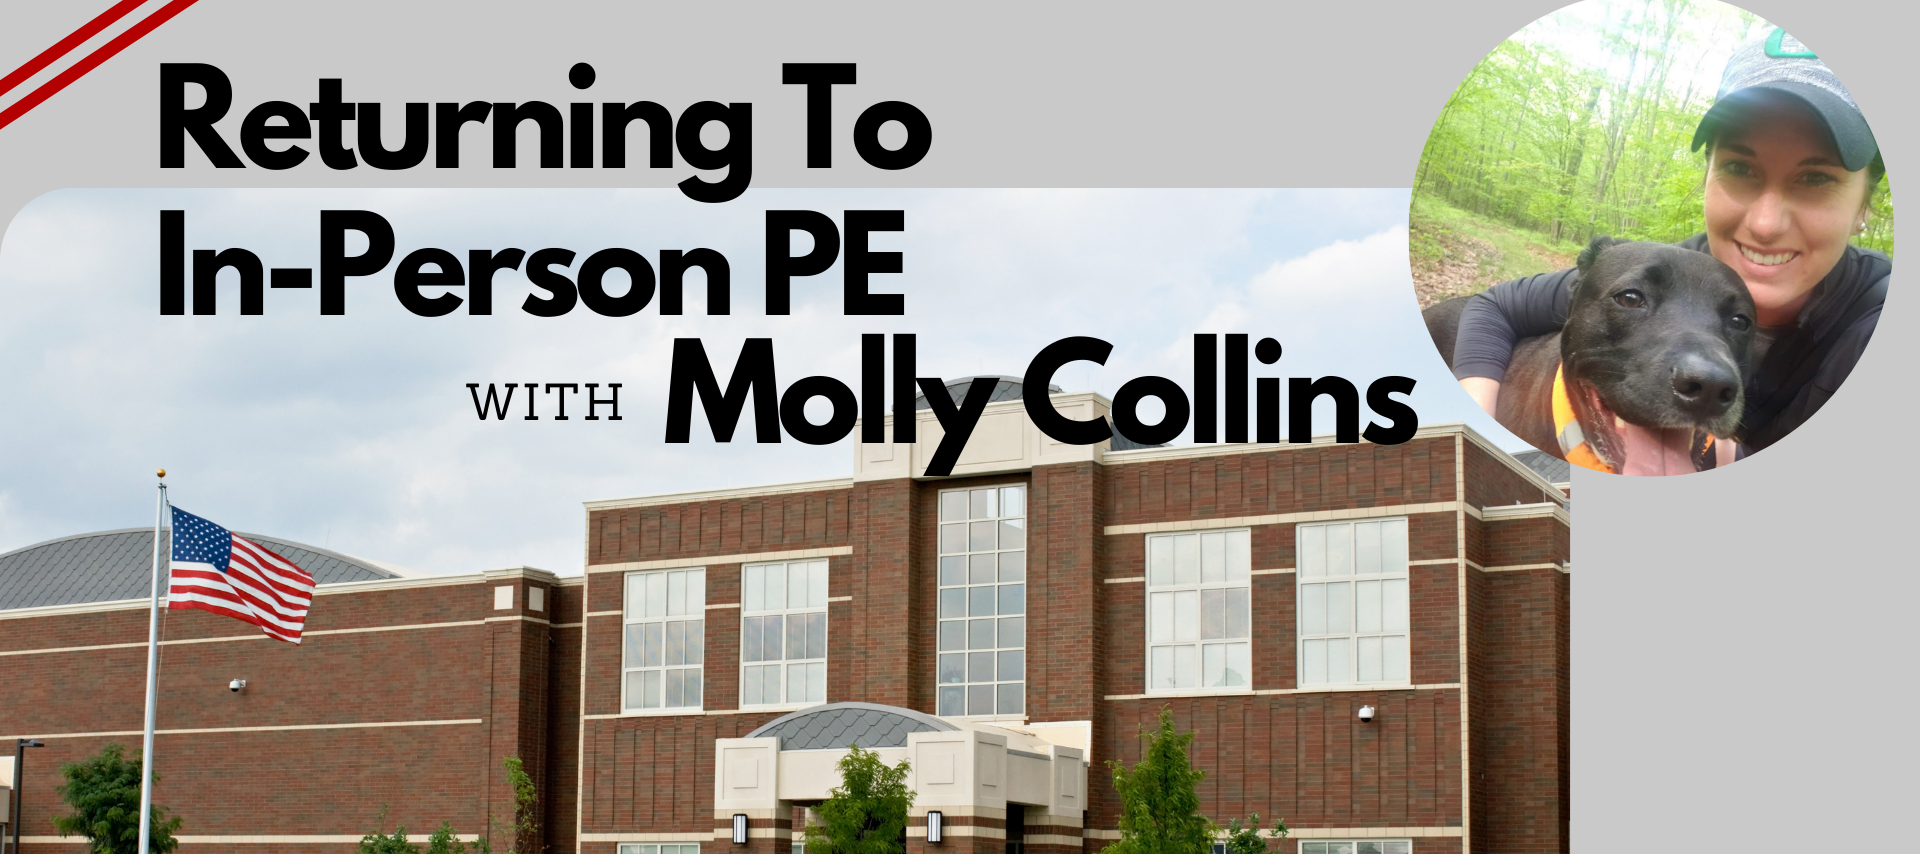 Returning to In-Person PE with Molly Collins